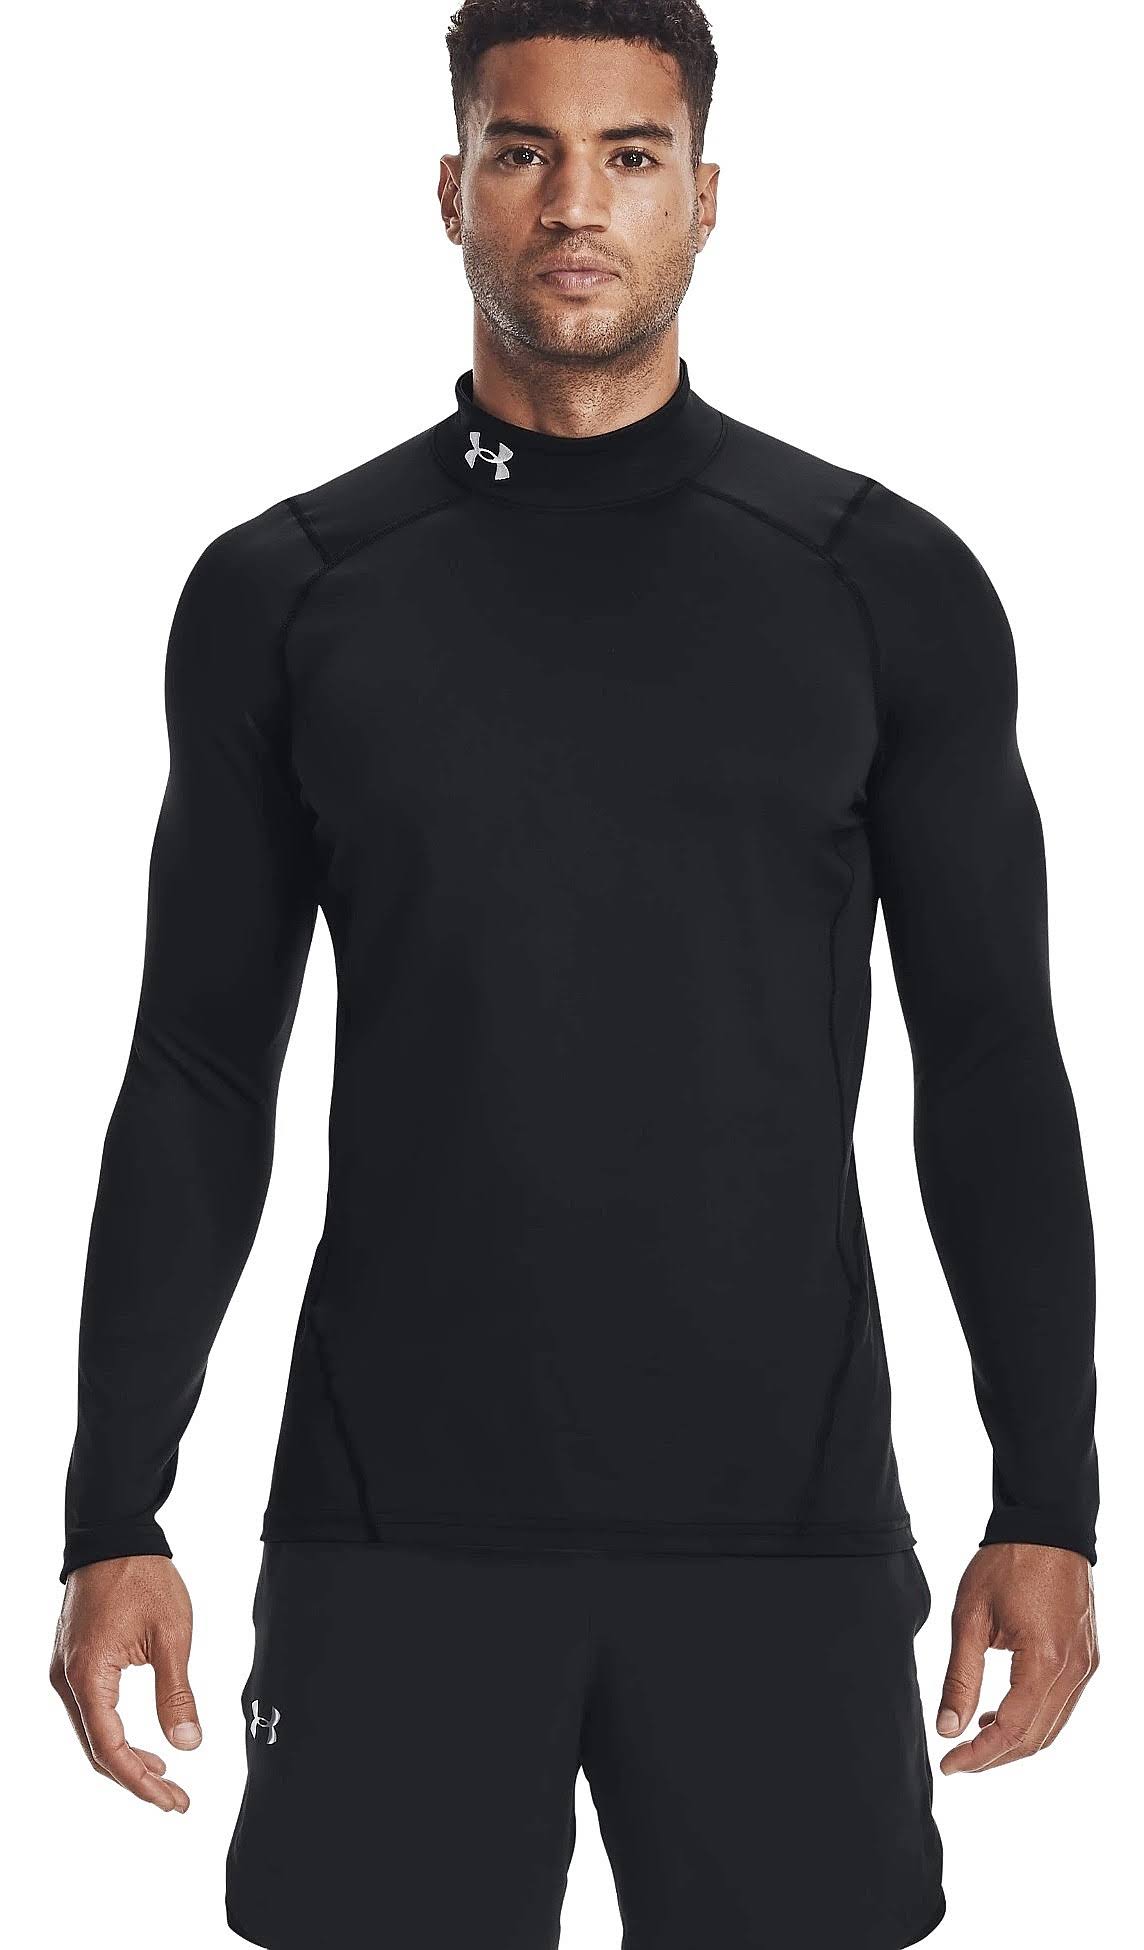 Under Armour ColdGear LS Fitted Mock Black XL